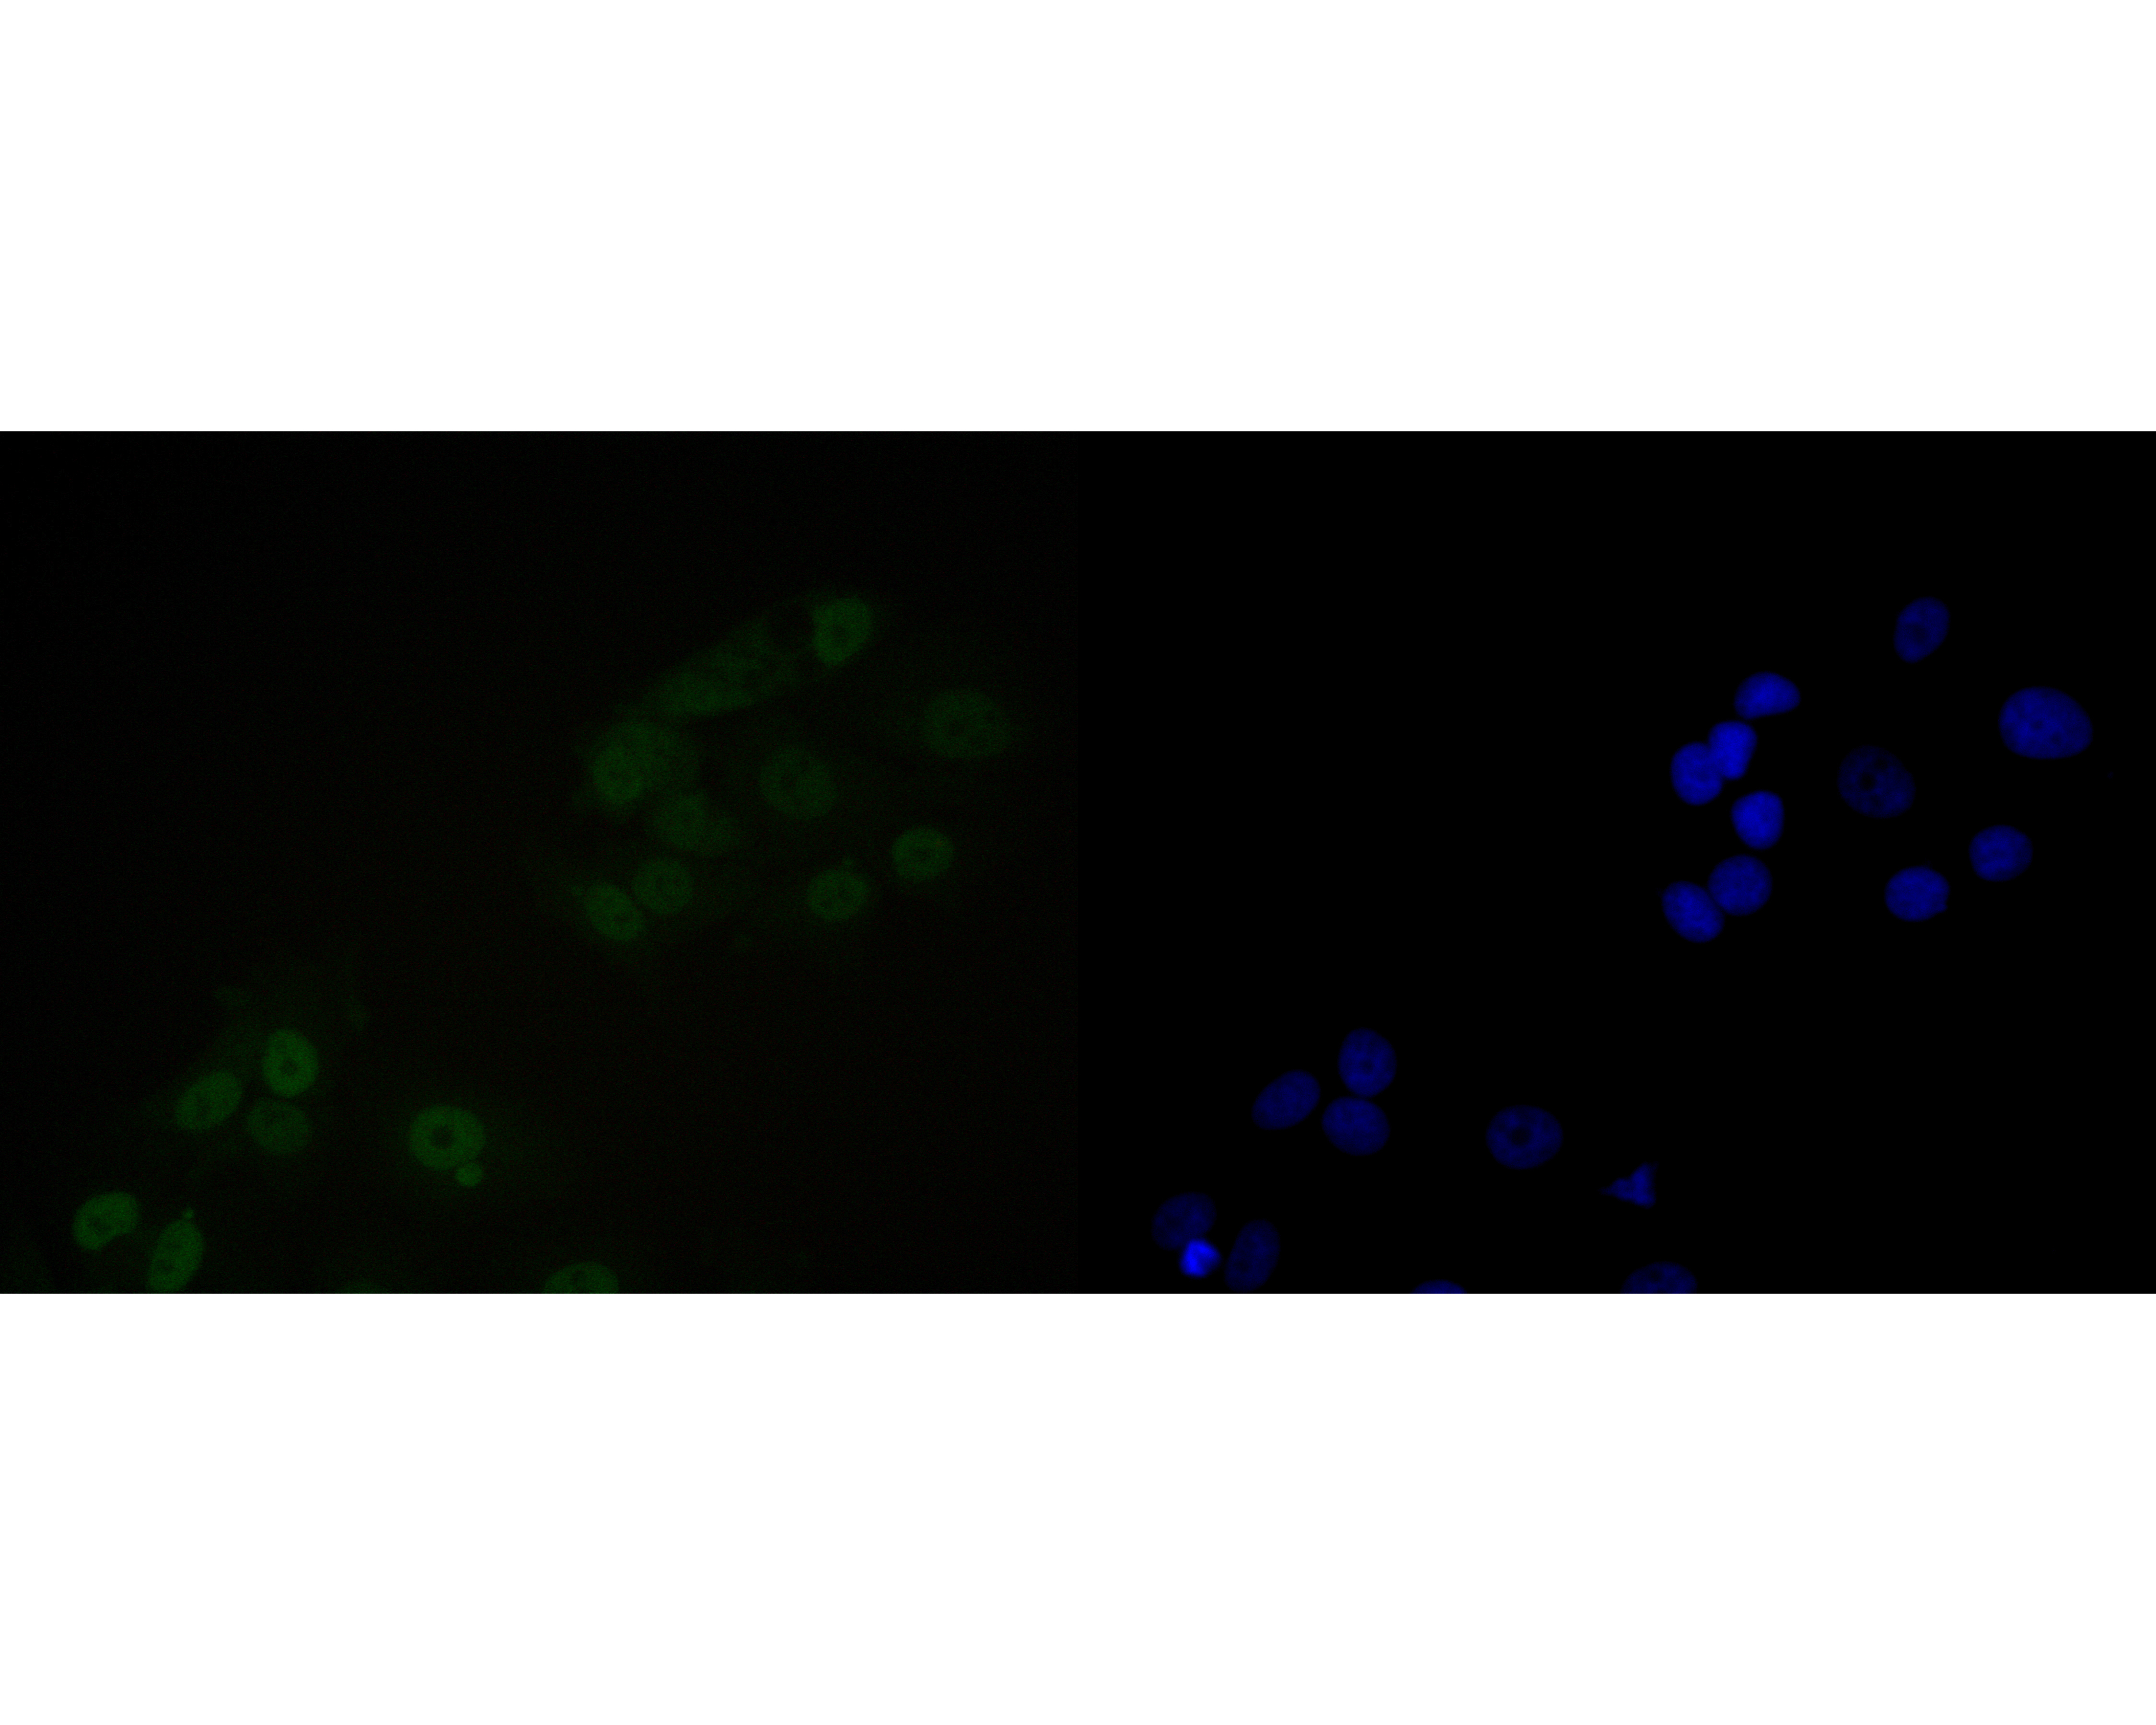 ICC staining of NuMA in MCF-7 cells (green). Formalin fixed cells were permeabilized with 0.1% Triton X-100 in TBS for 10 minutes at room temperature and blocked with 1% Blocker BSA for 15 minutes at room temperature. Cells were probed with the primary antibody (EM1902-16, 1/100) for 1 hour at room temperature, washed with PBS. Alexa Fluor®488 Goat anti-Mouse IgG was used as the secondary antibody at 1/1,000 dilution. The nuclear counter stain is DAPI (blue).